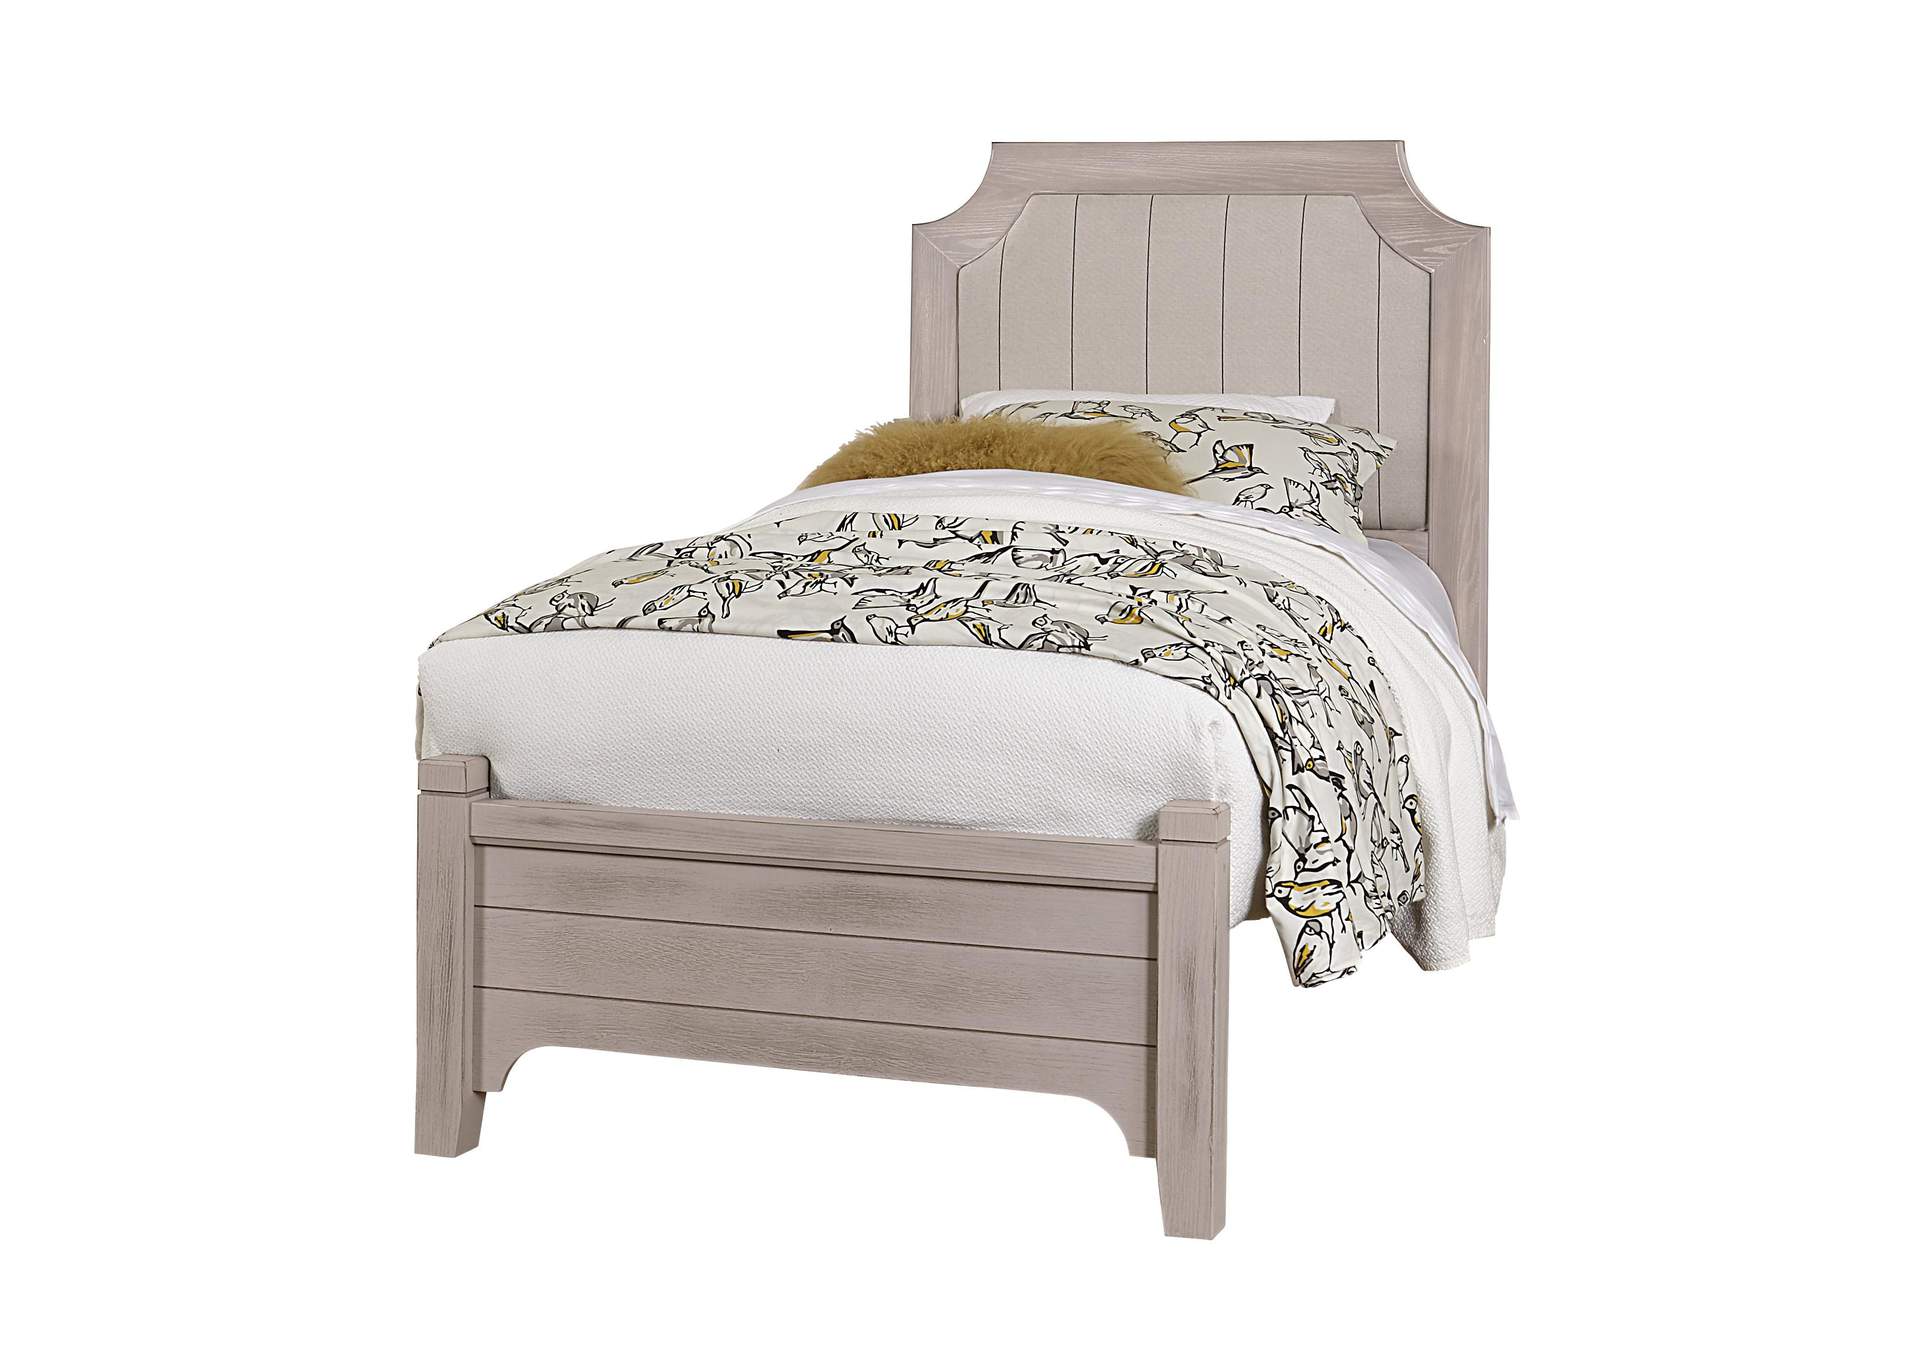 Bungalow Gallery Upholstered Full Bed